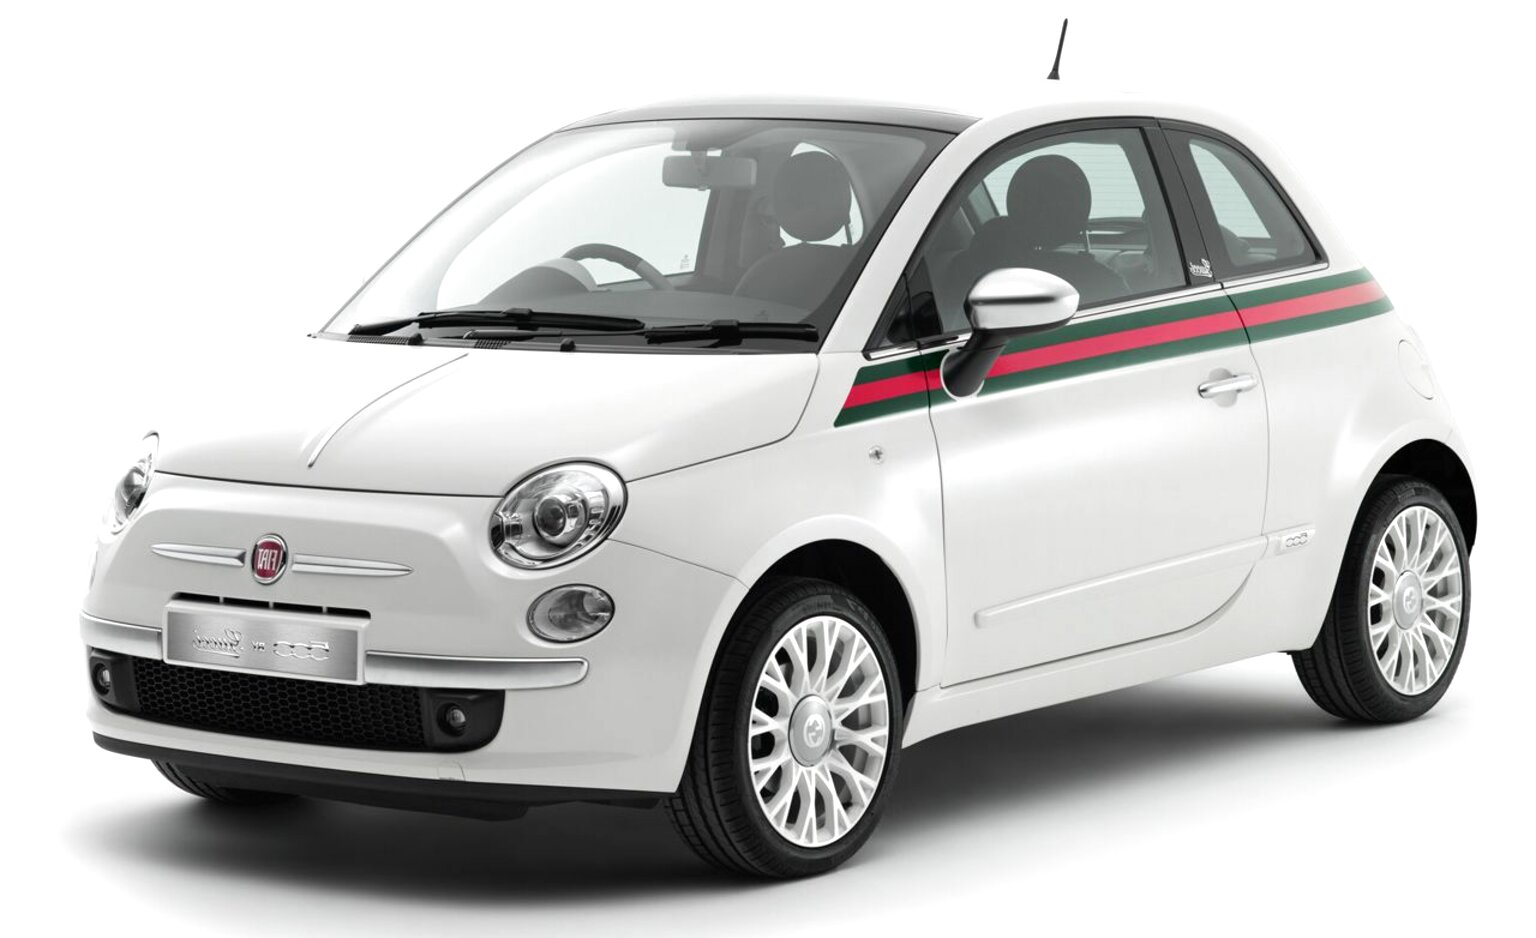 Fiat 500 Gucci for sale in UK 50 used Fiat 500 Guccis